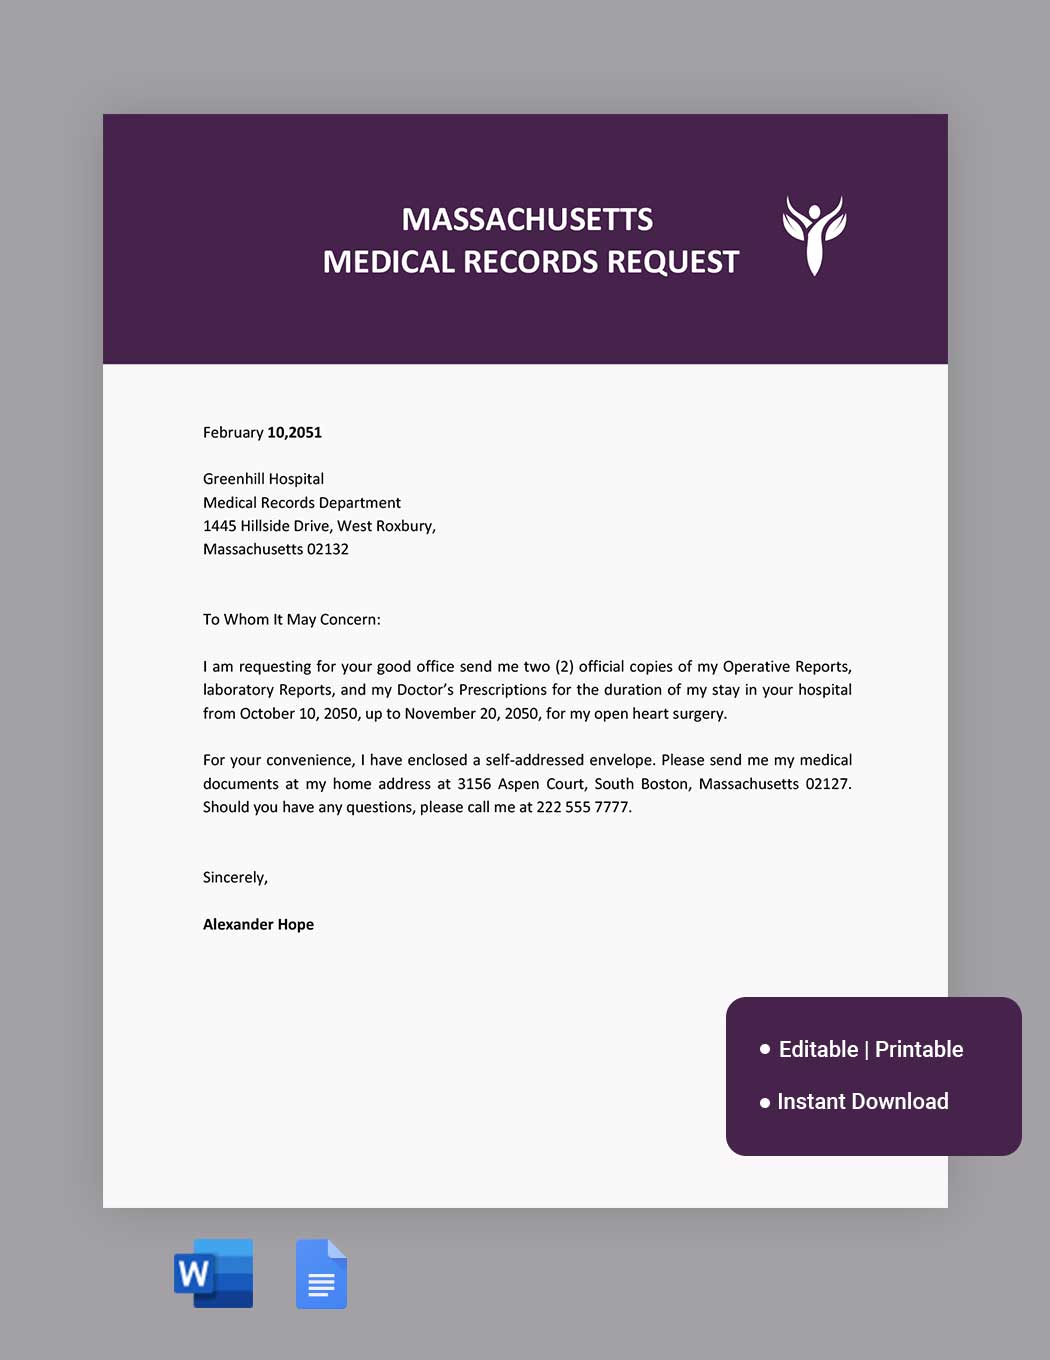 Massachusetts Medical Records Request Template in Word, Google Docs